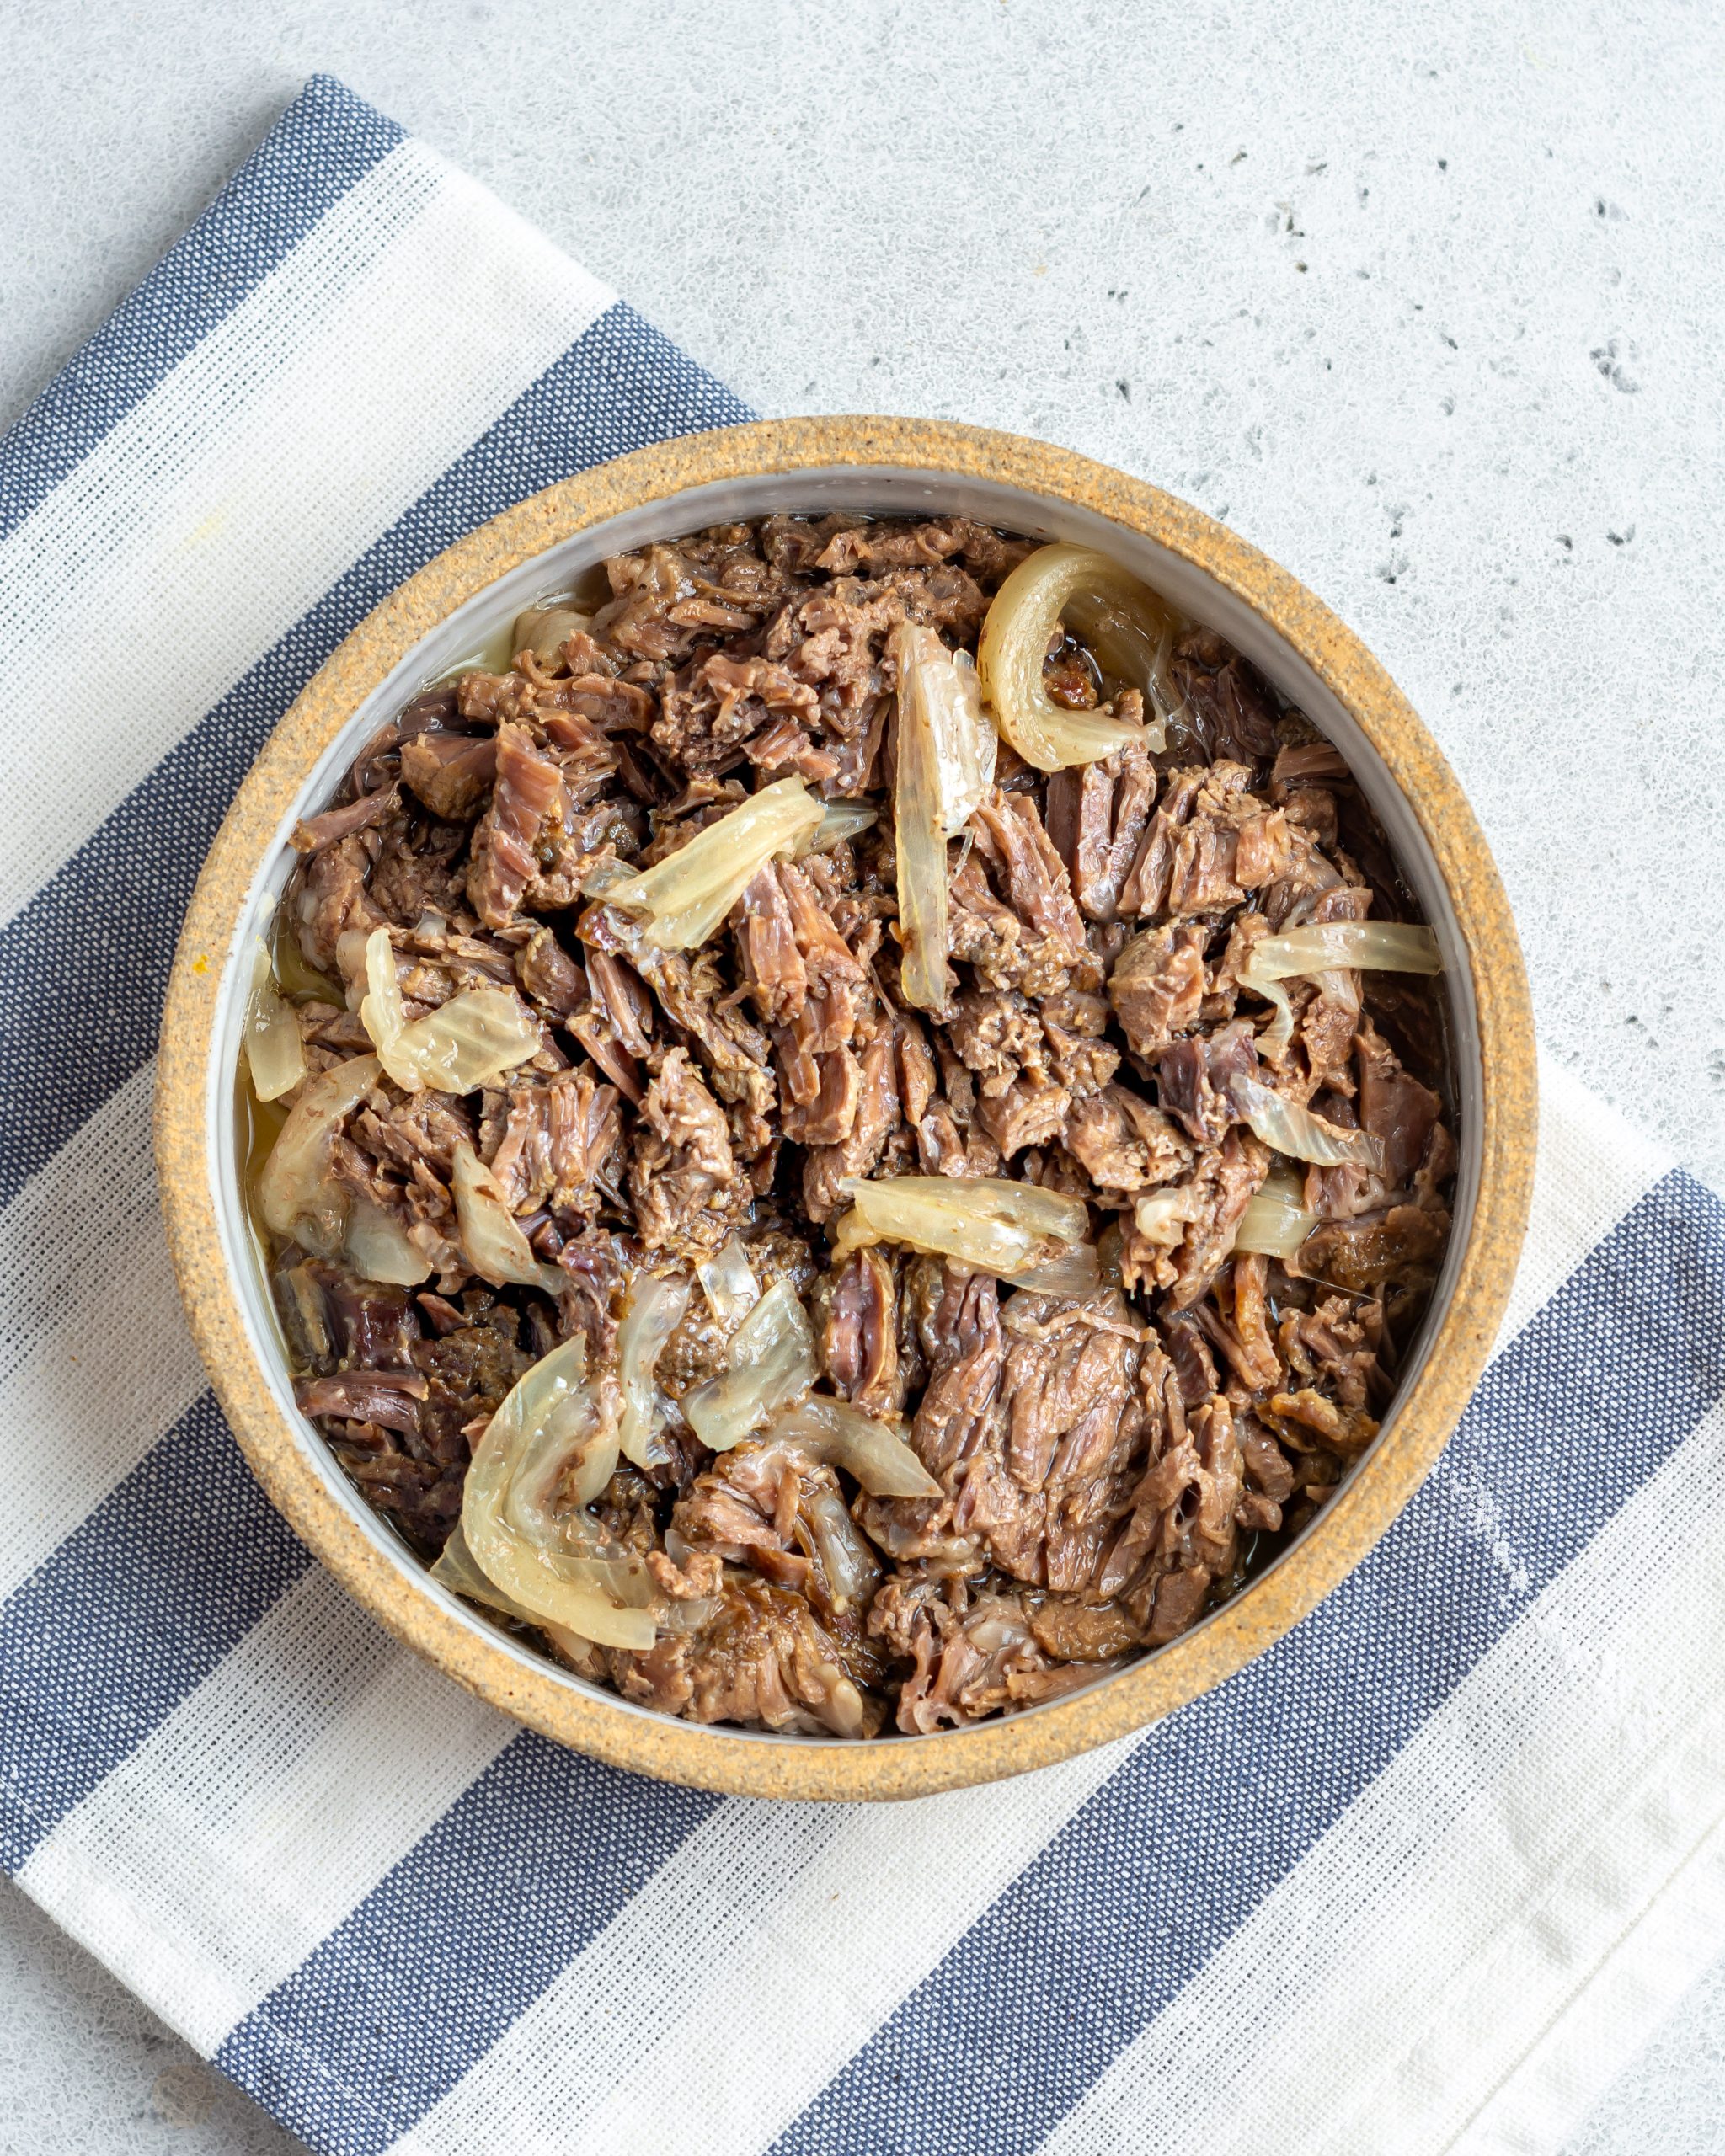 Looking for a quick, easy recipe you can make in no time? This instant pot shredded beef recipe will impress you with how many recipes you can make out of it!